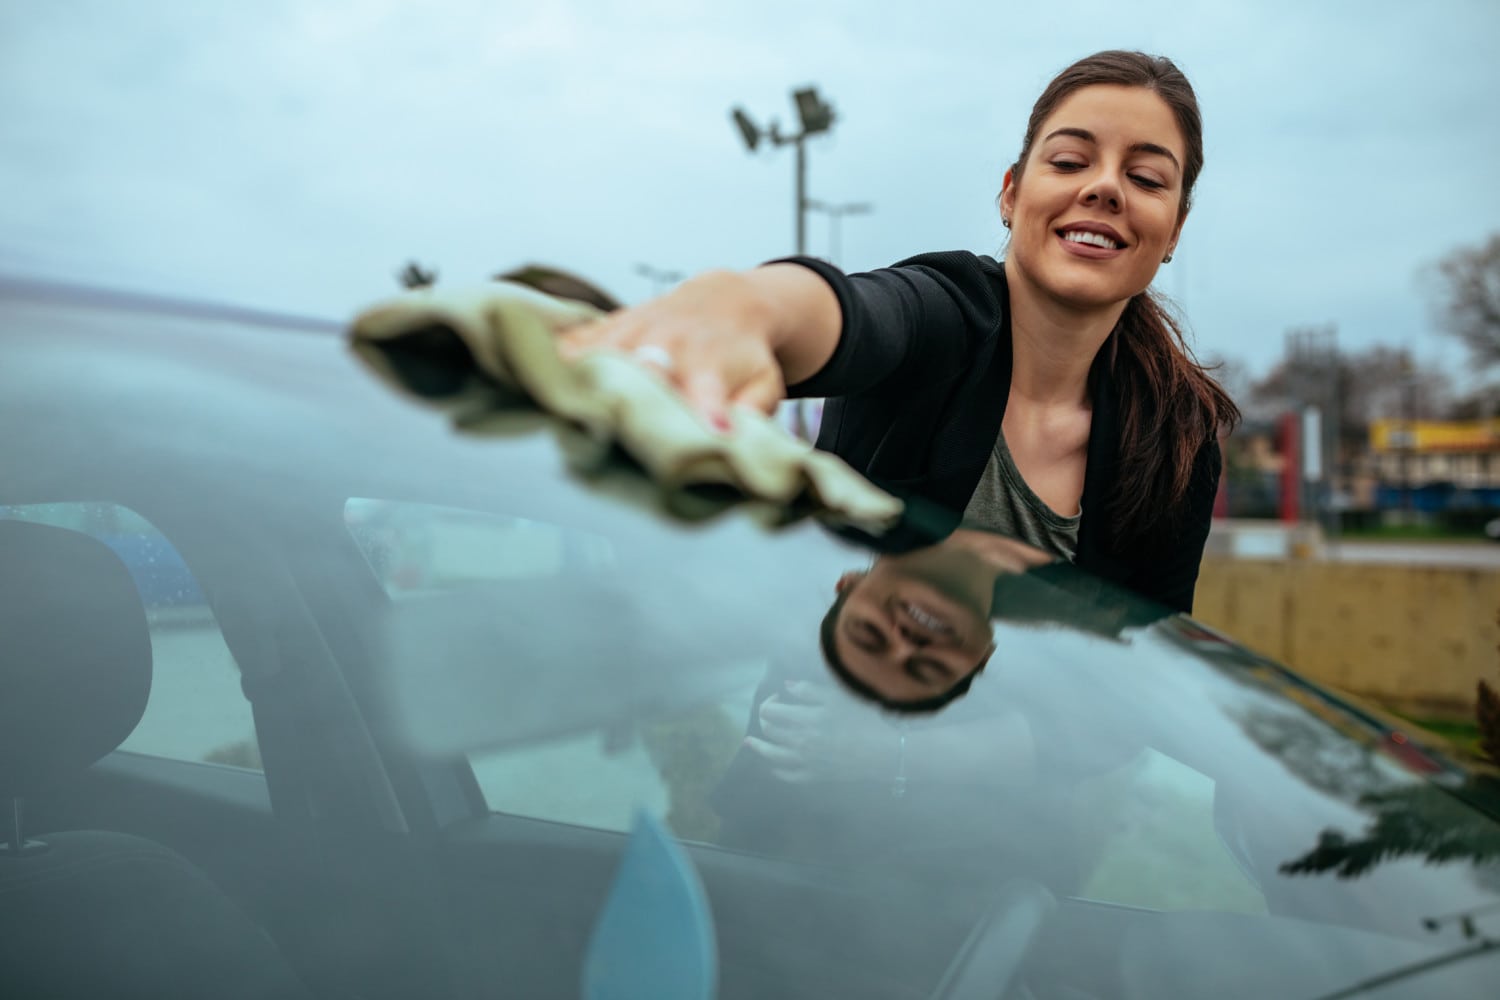 Shot of a young woman cleaning her car